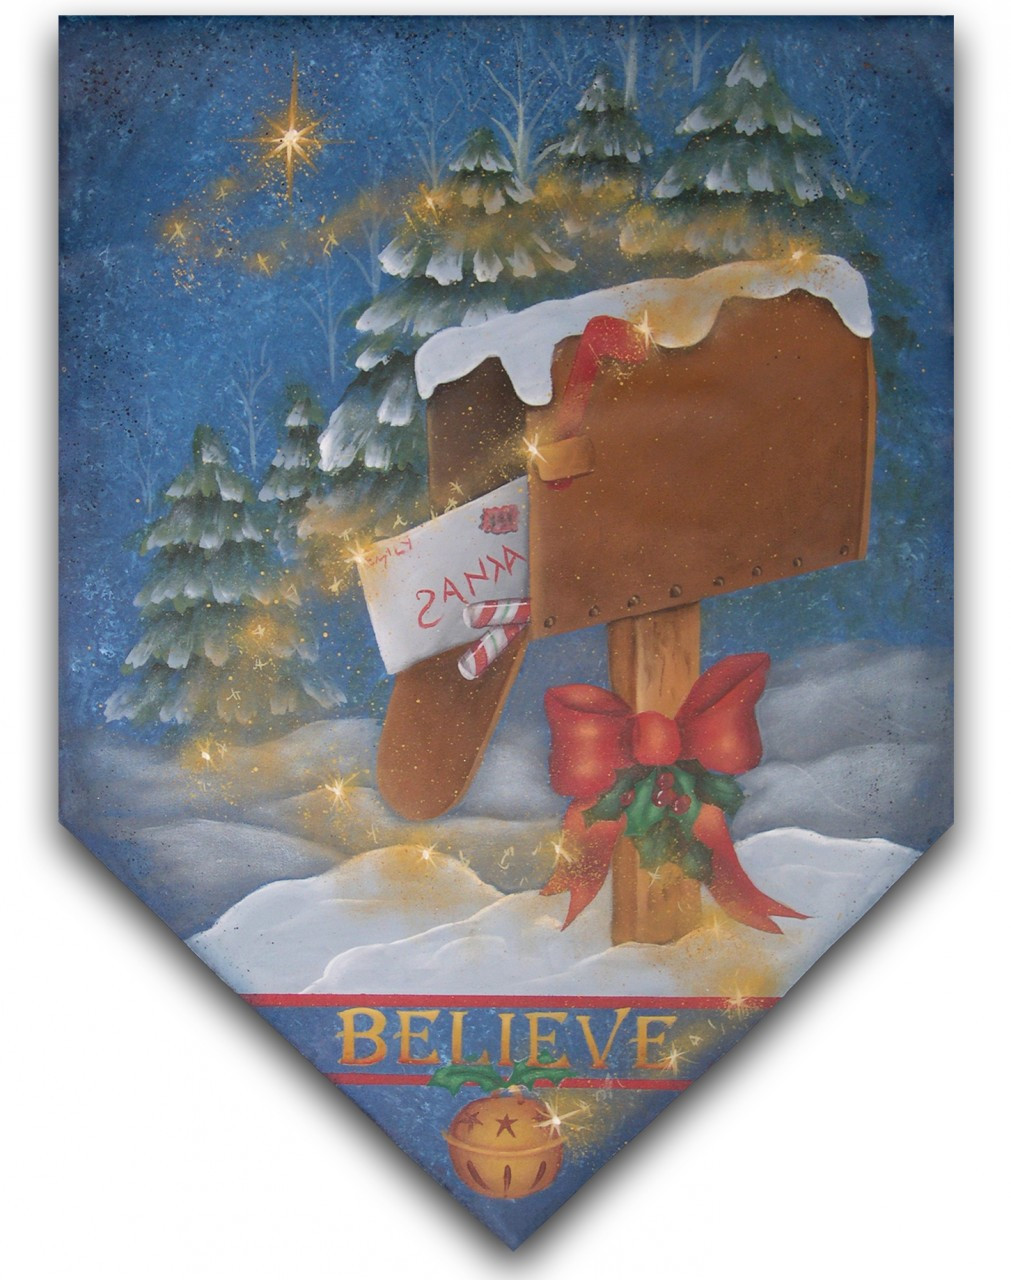 Believe packet - Patricia Rawlinson